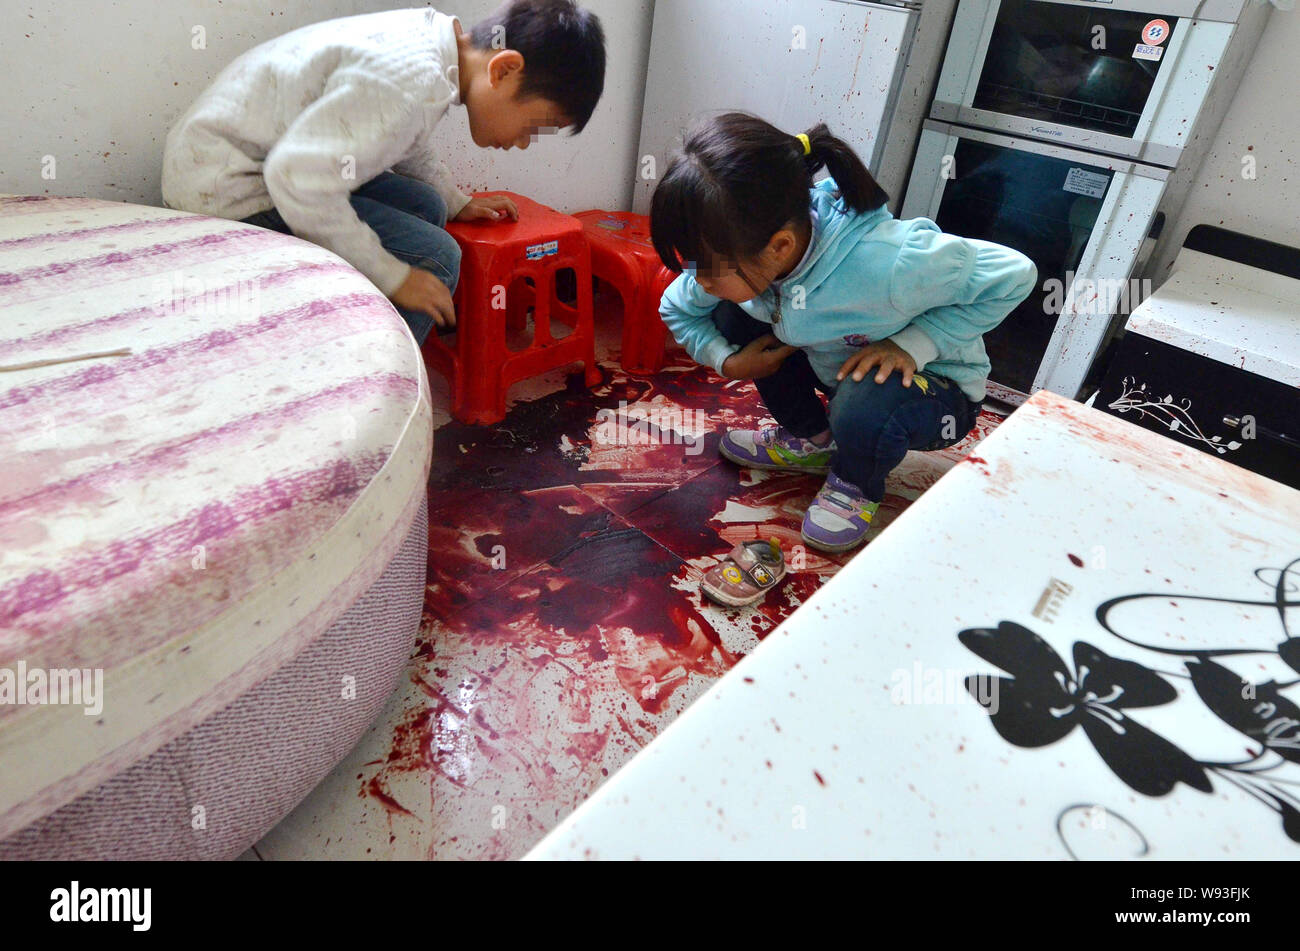 Two Young Students Look At The Bloody Floor At The Home Of Their